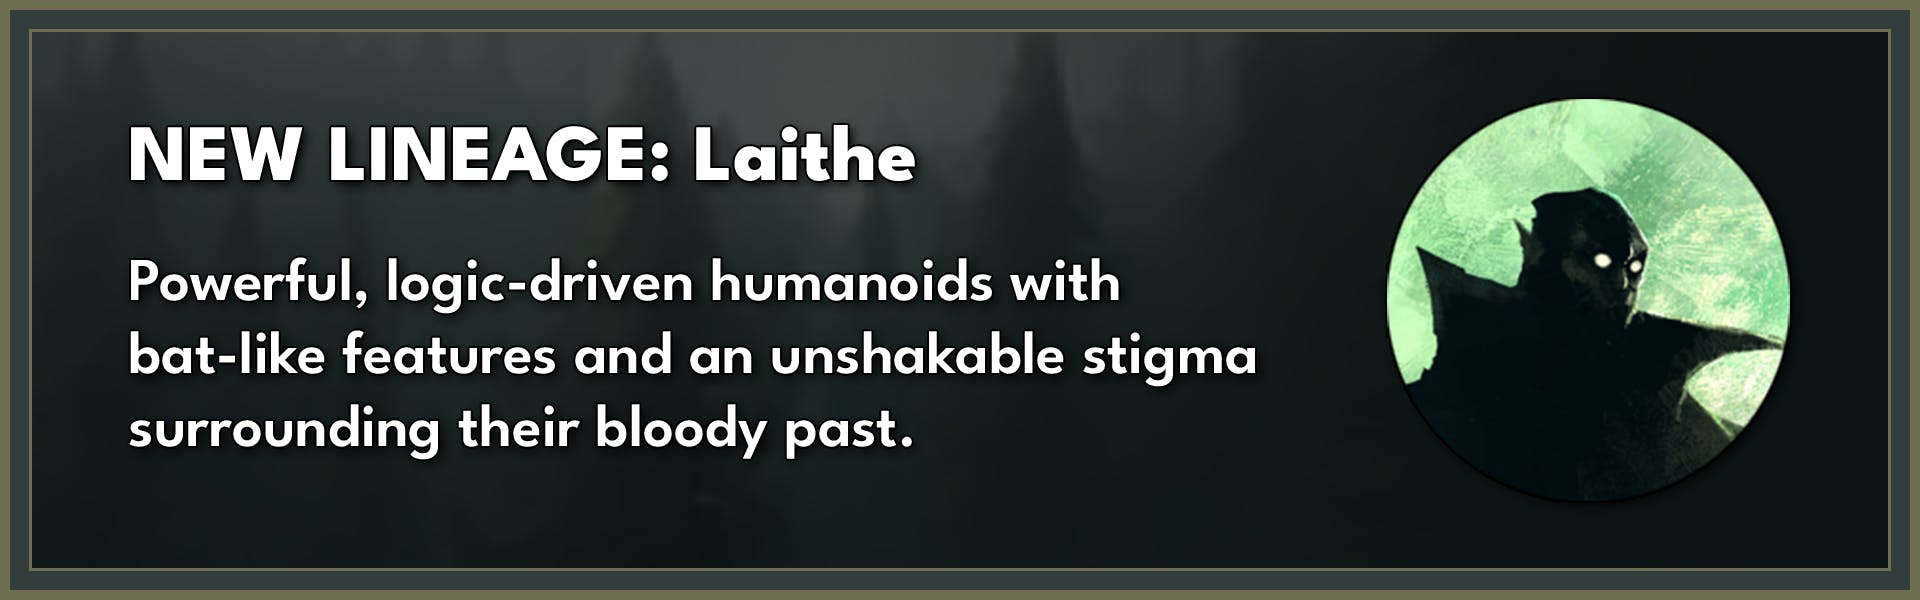 NEW LINEAGE: Laithe (at $21,000 goal)